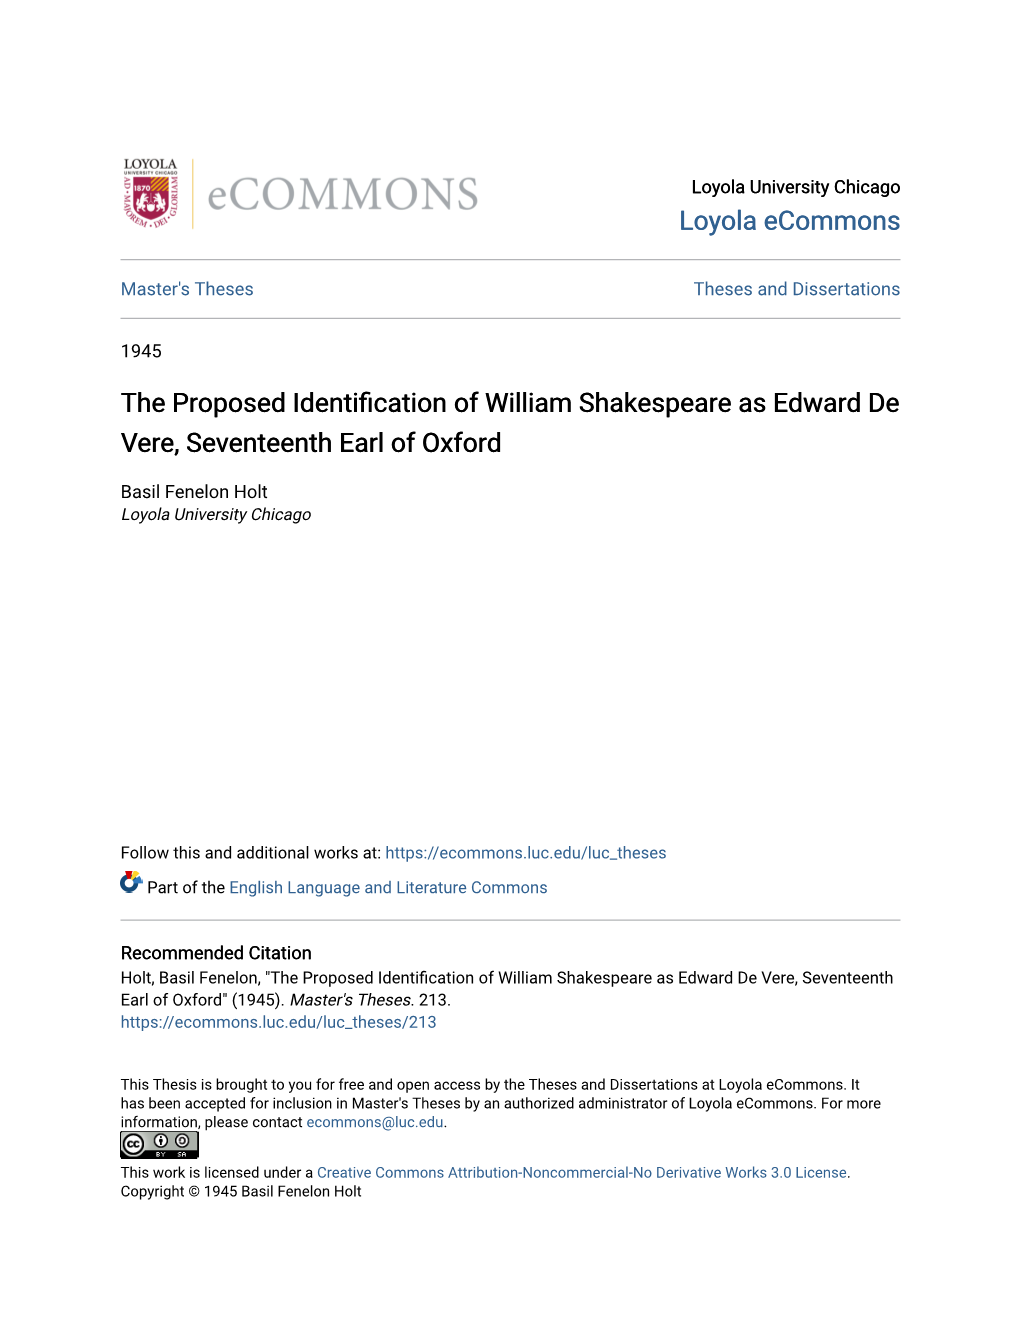 The Proposed Identification of William Shakespeare As Edward De Vere, Seventeenth Earl of Oxford